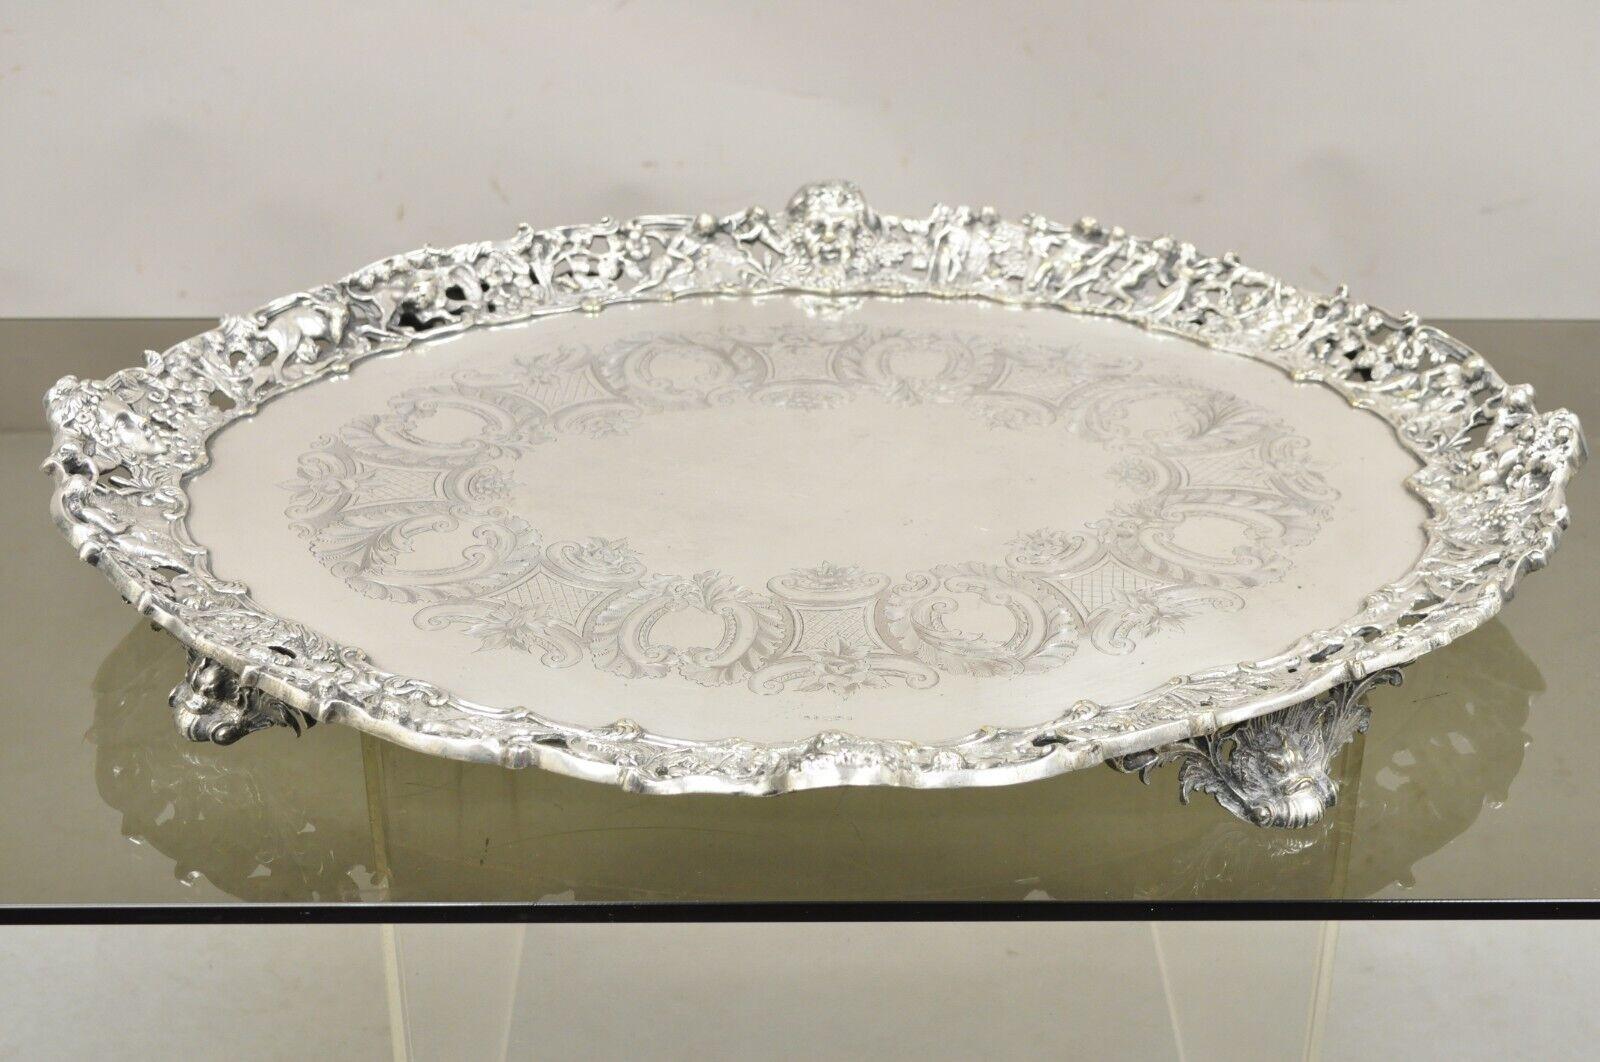 19th Century French Renaissance Bacchanal Scene Silver Plated Bacchus Figural Salver Tray For Sale